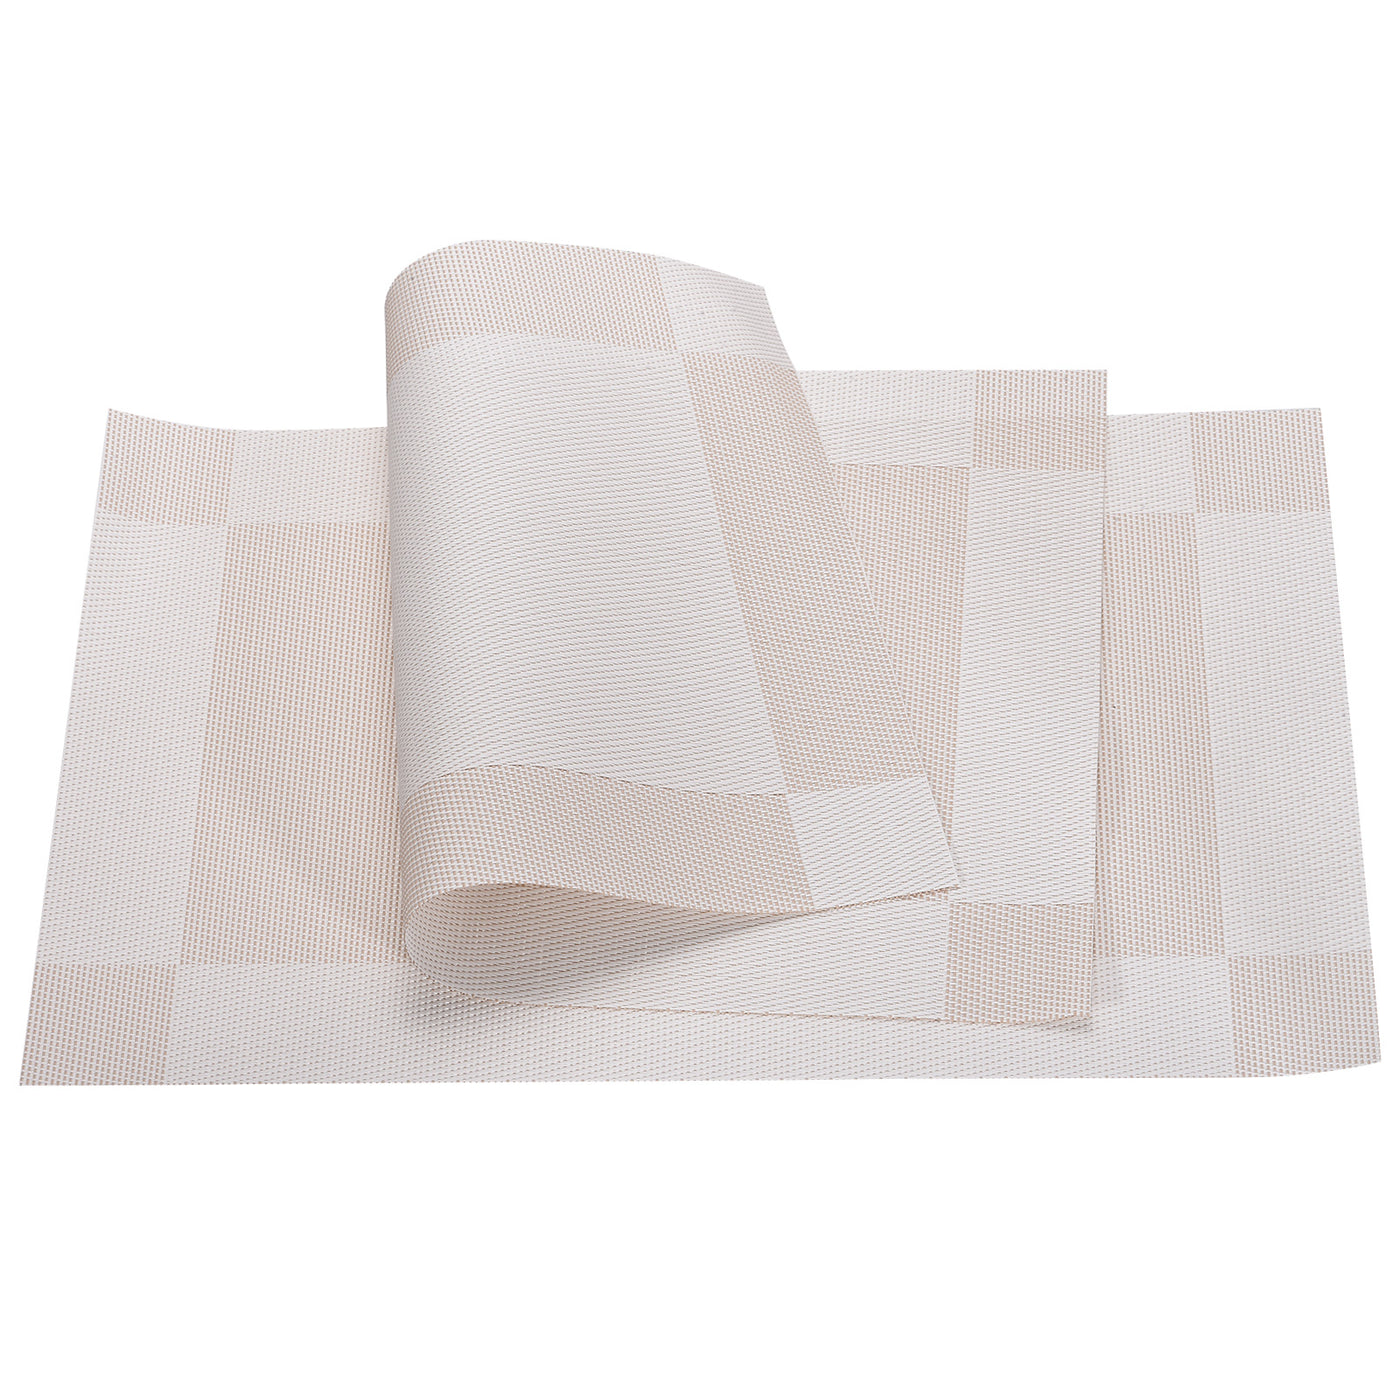 uxcell Uxcell Place Mats 450x300mm 4pcs PVC Table Washable Woven Placemat, Beige